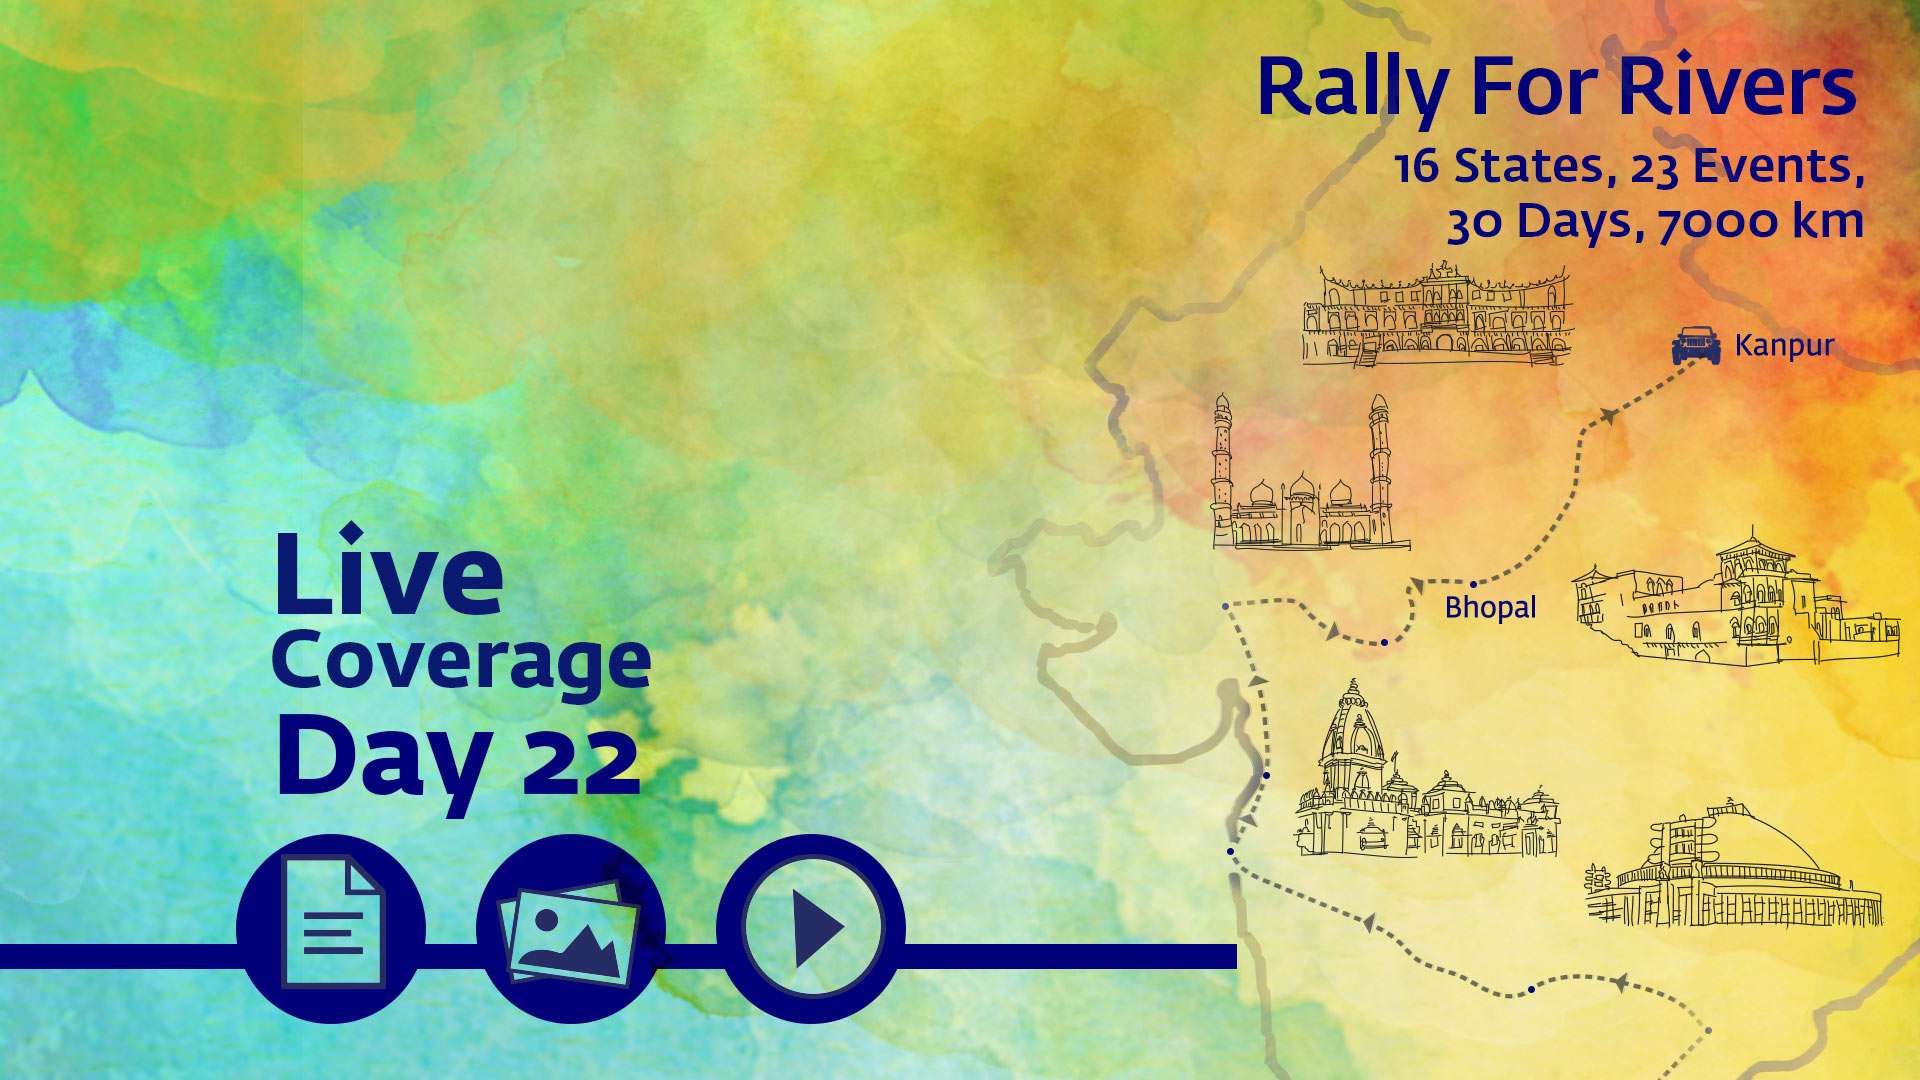 Live Coverage Day 22 – Rally For Rivers, Bhopal to Kanpur